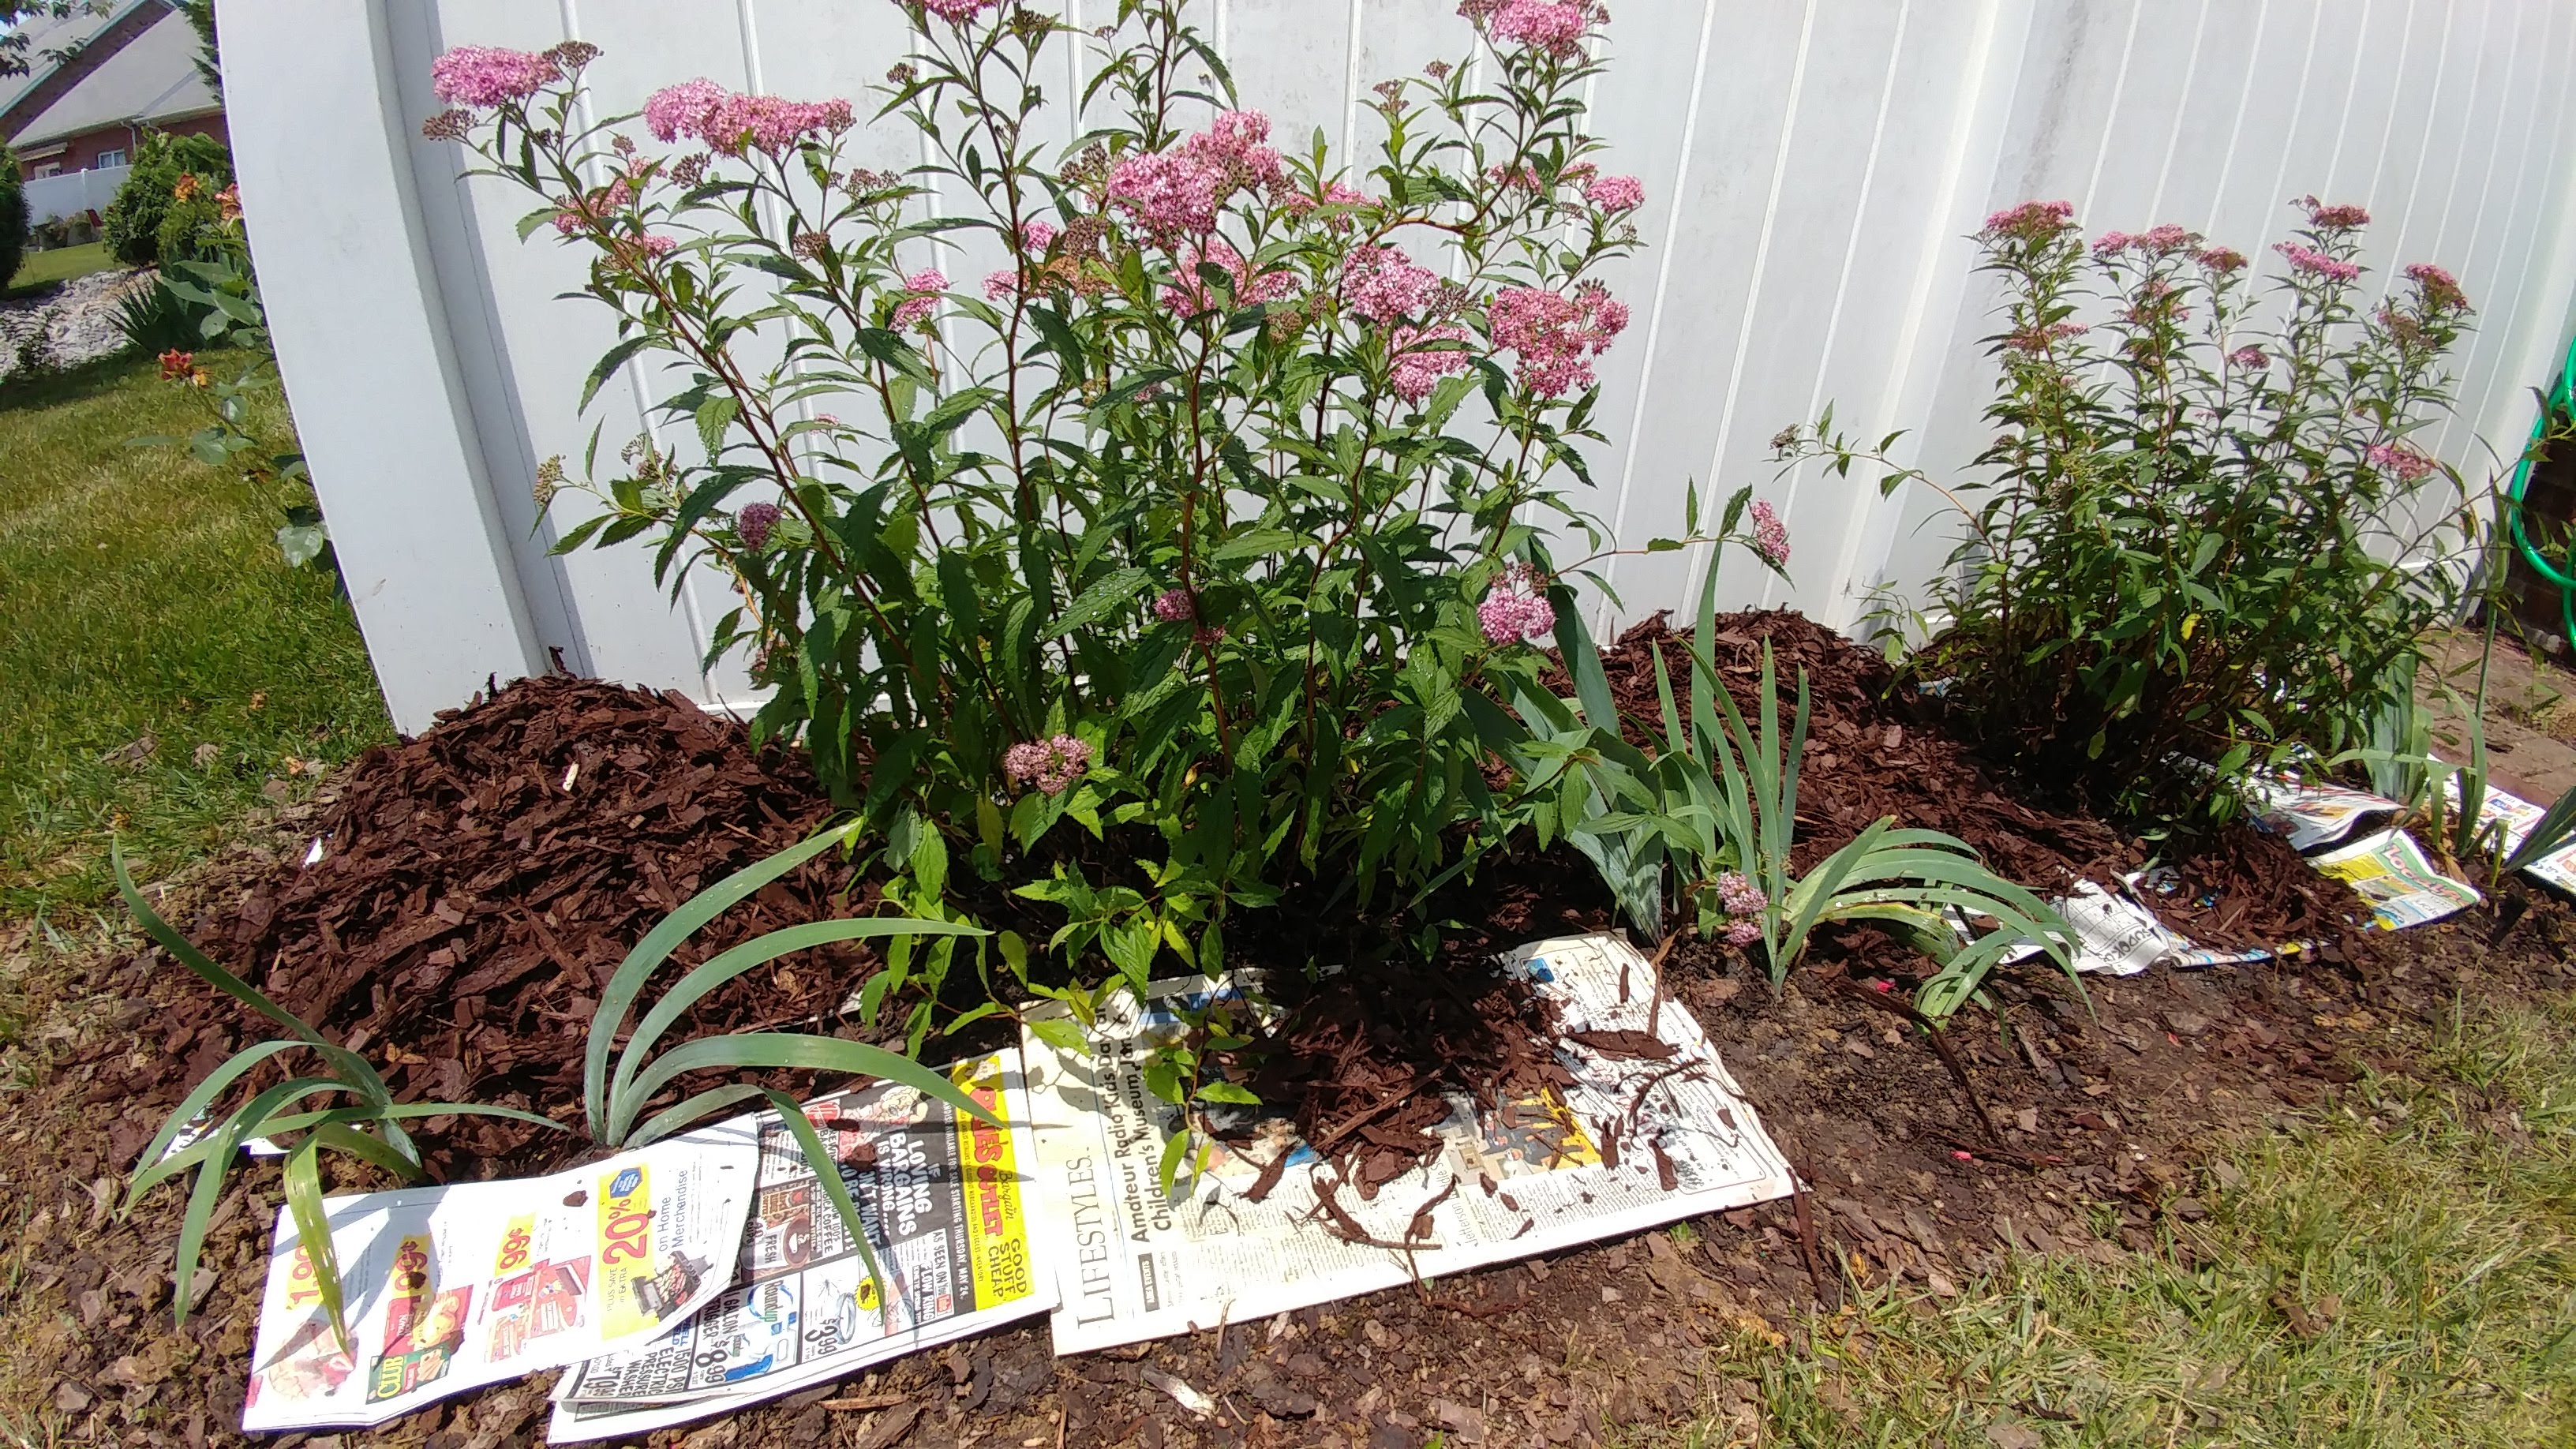 spiraea and irises with newspaper covered by mulch